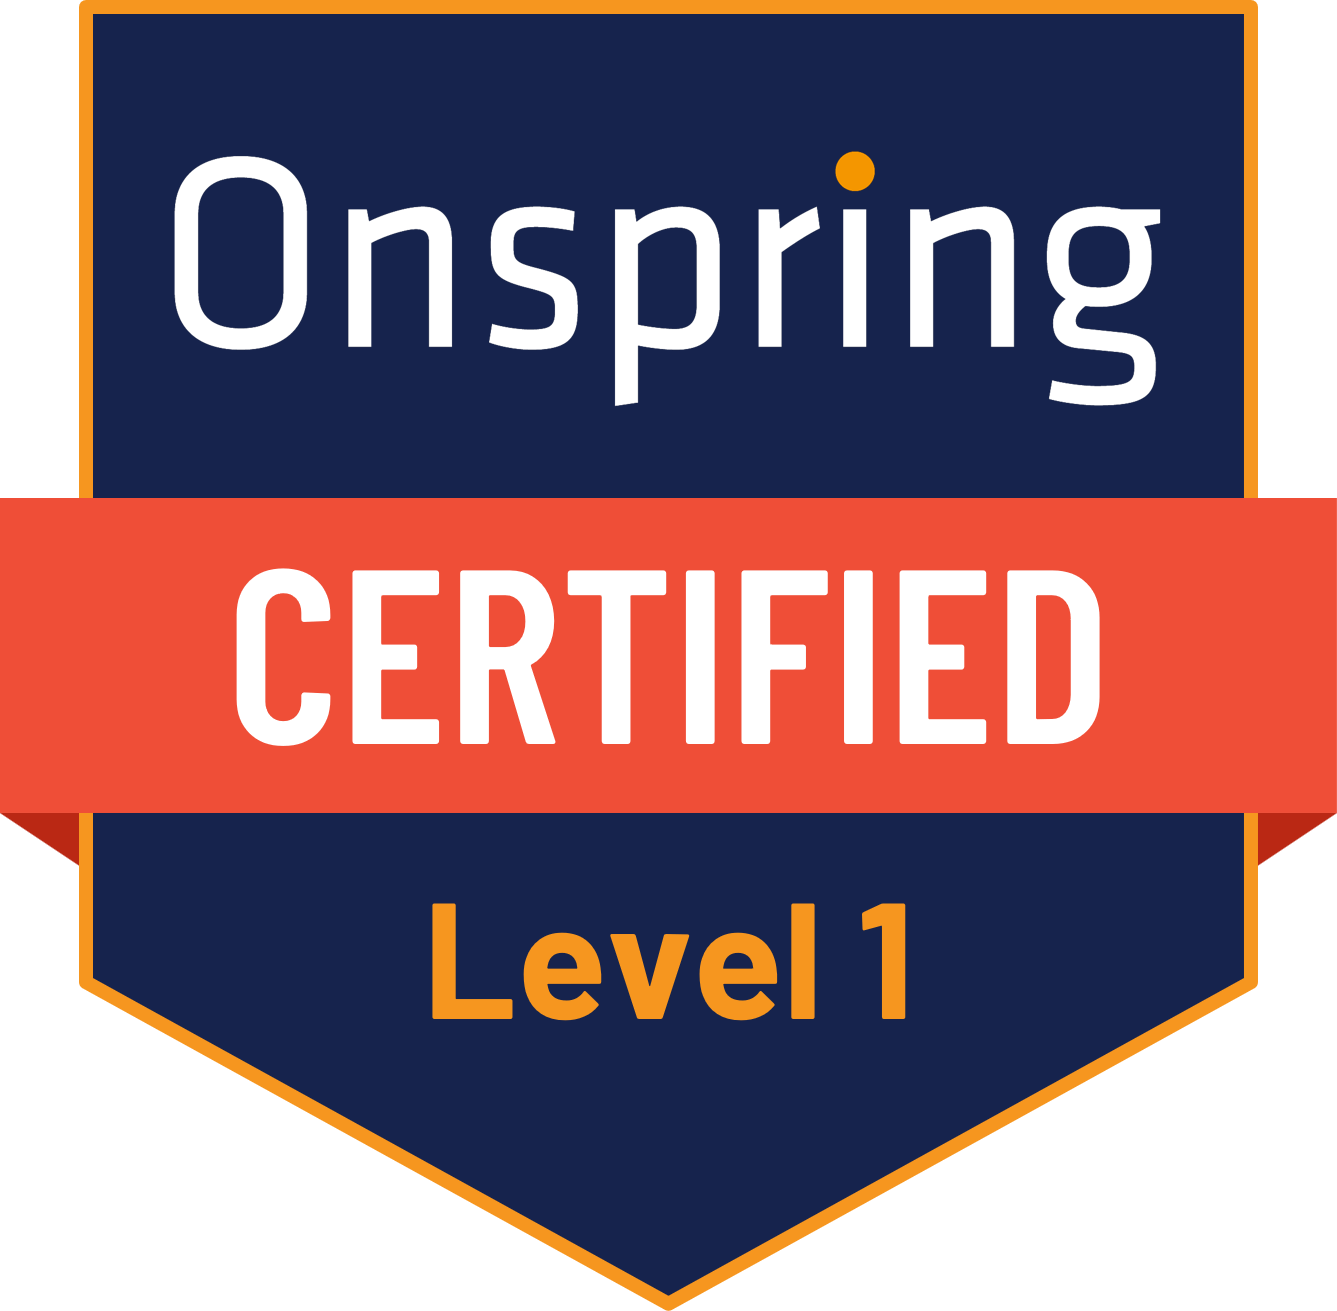 Onspring Certified Administrator Level 1 Badge